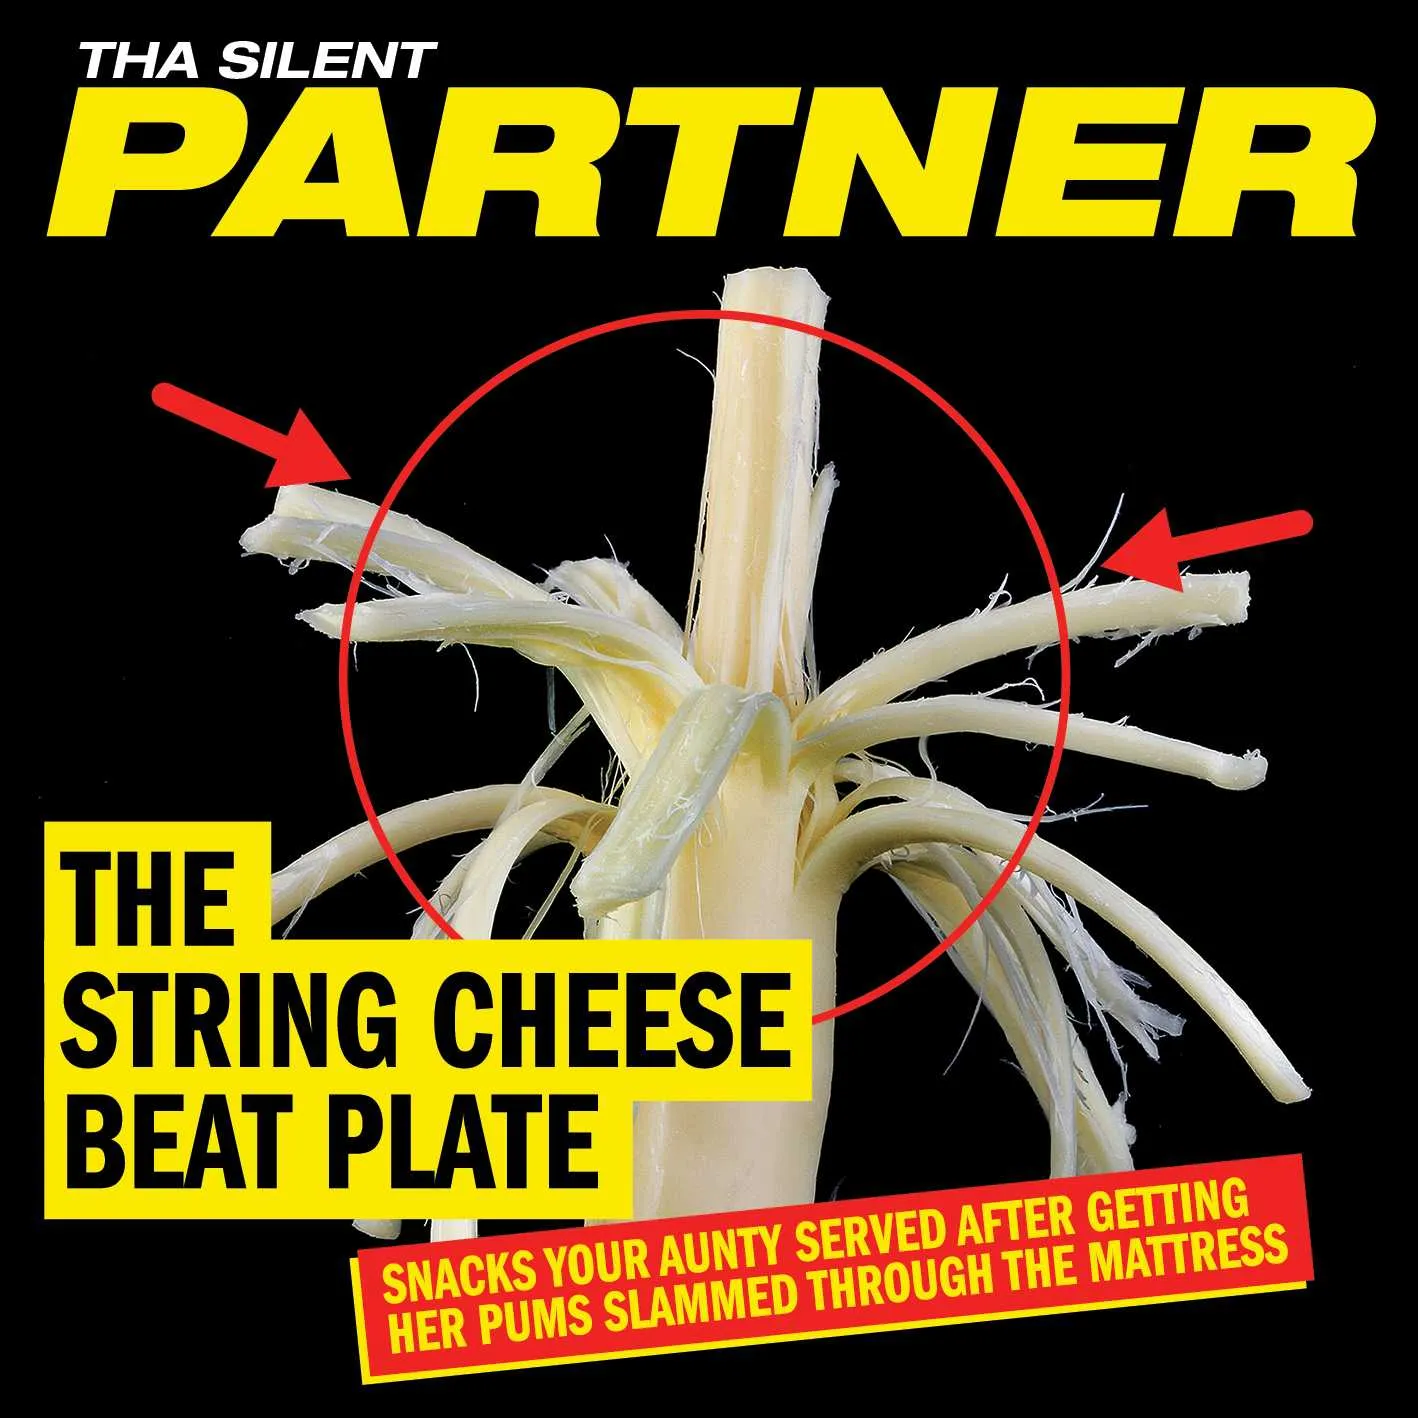 Album cover for “The String Cheese Beat Plate” by Tha Silent Partner